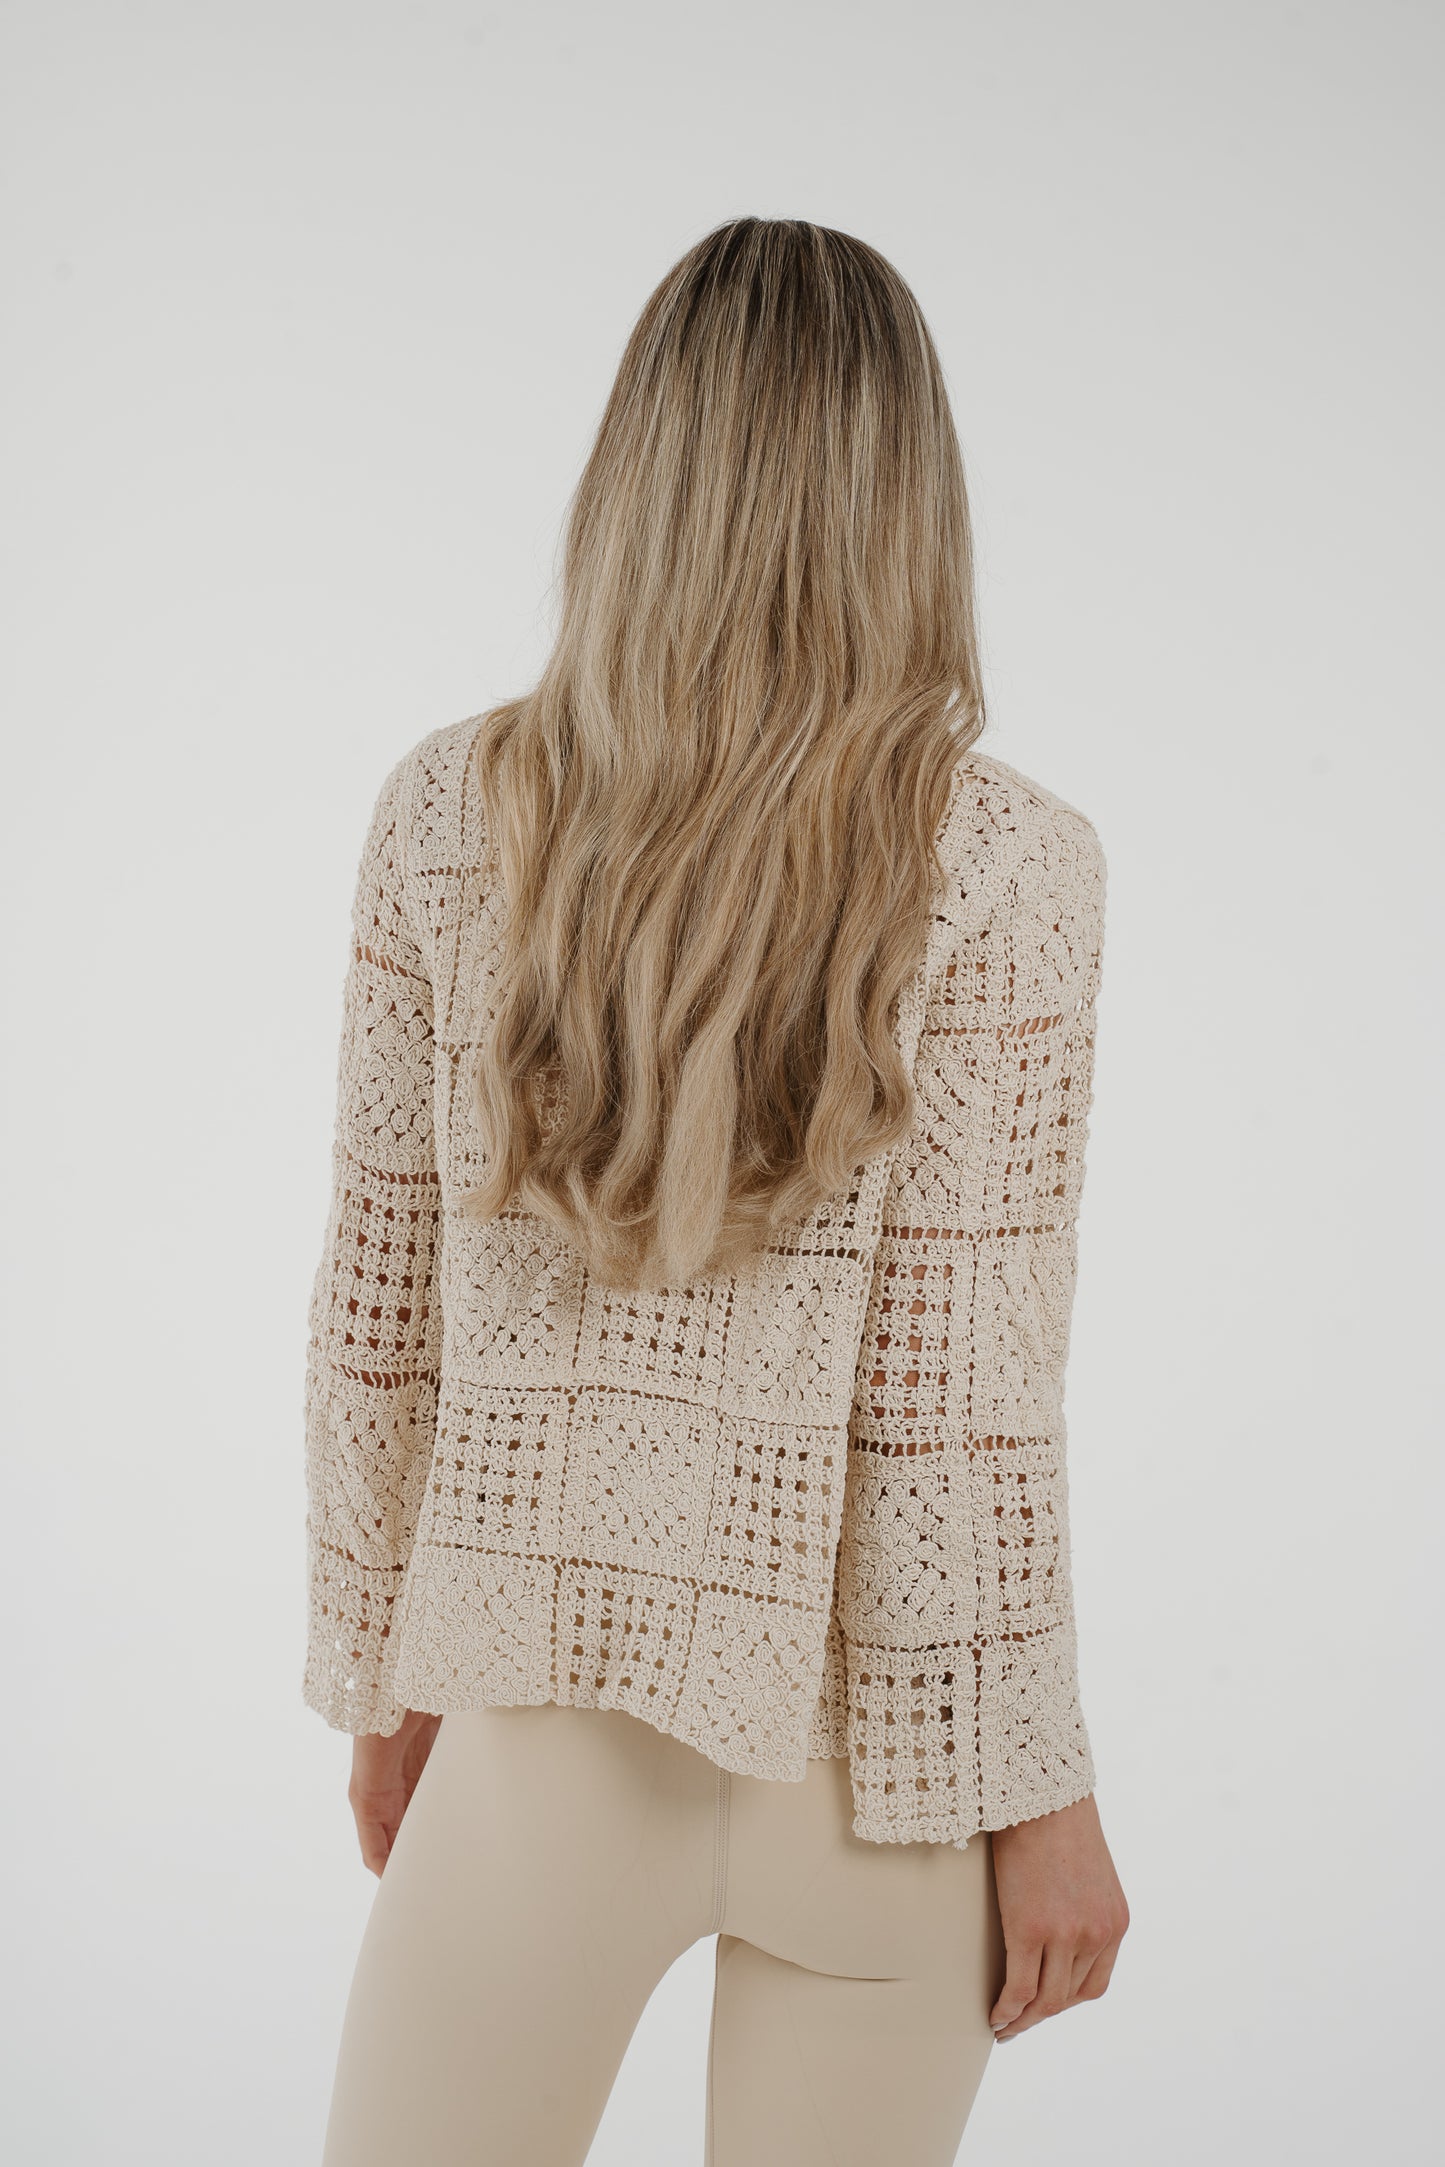 Indie Crochet Square Shirt In Neutral